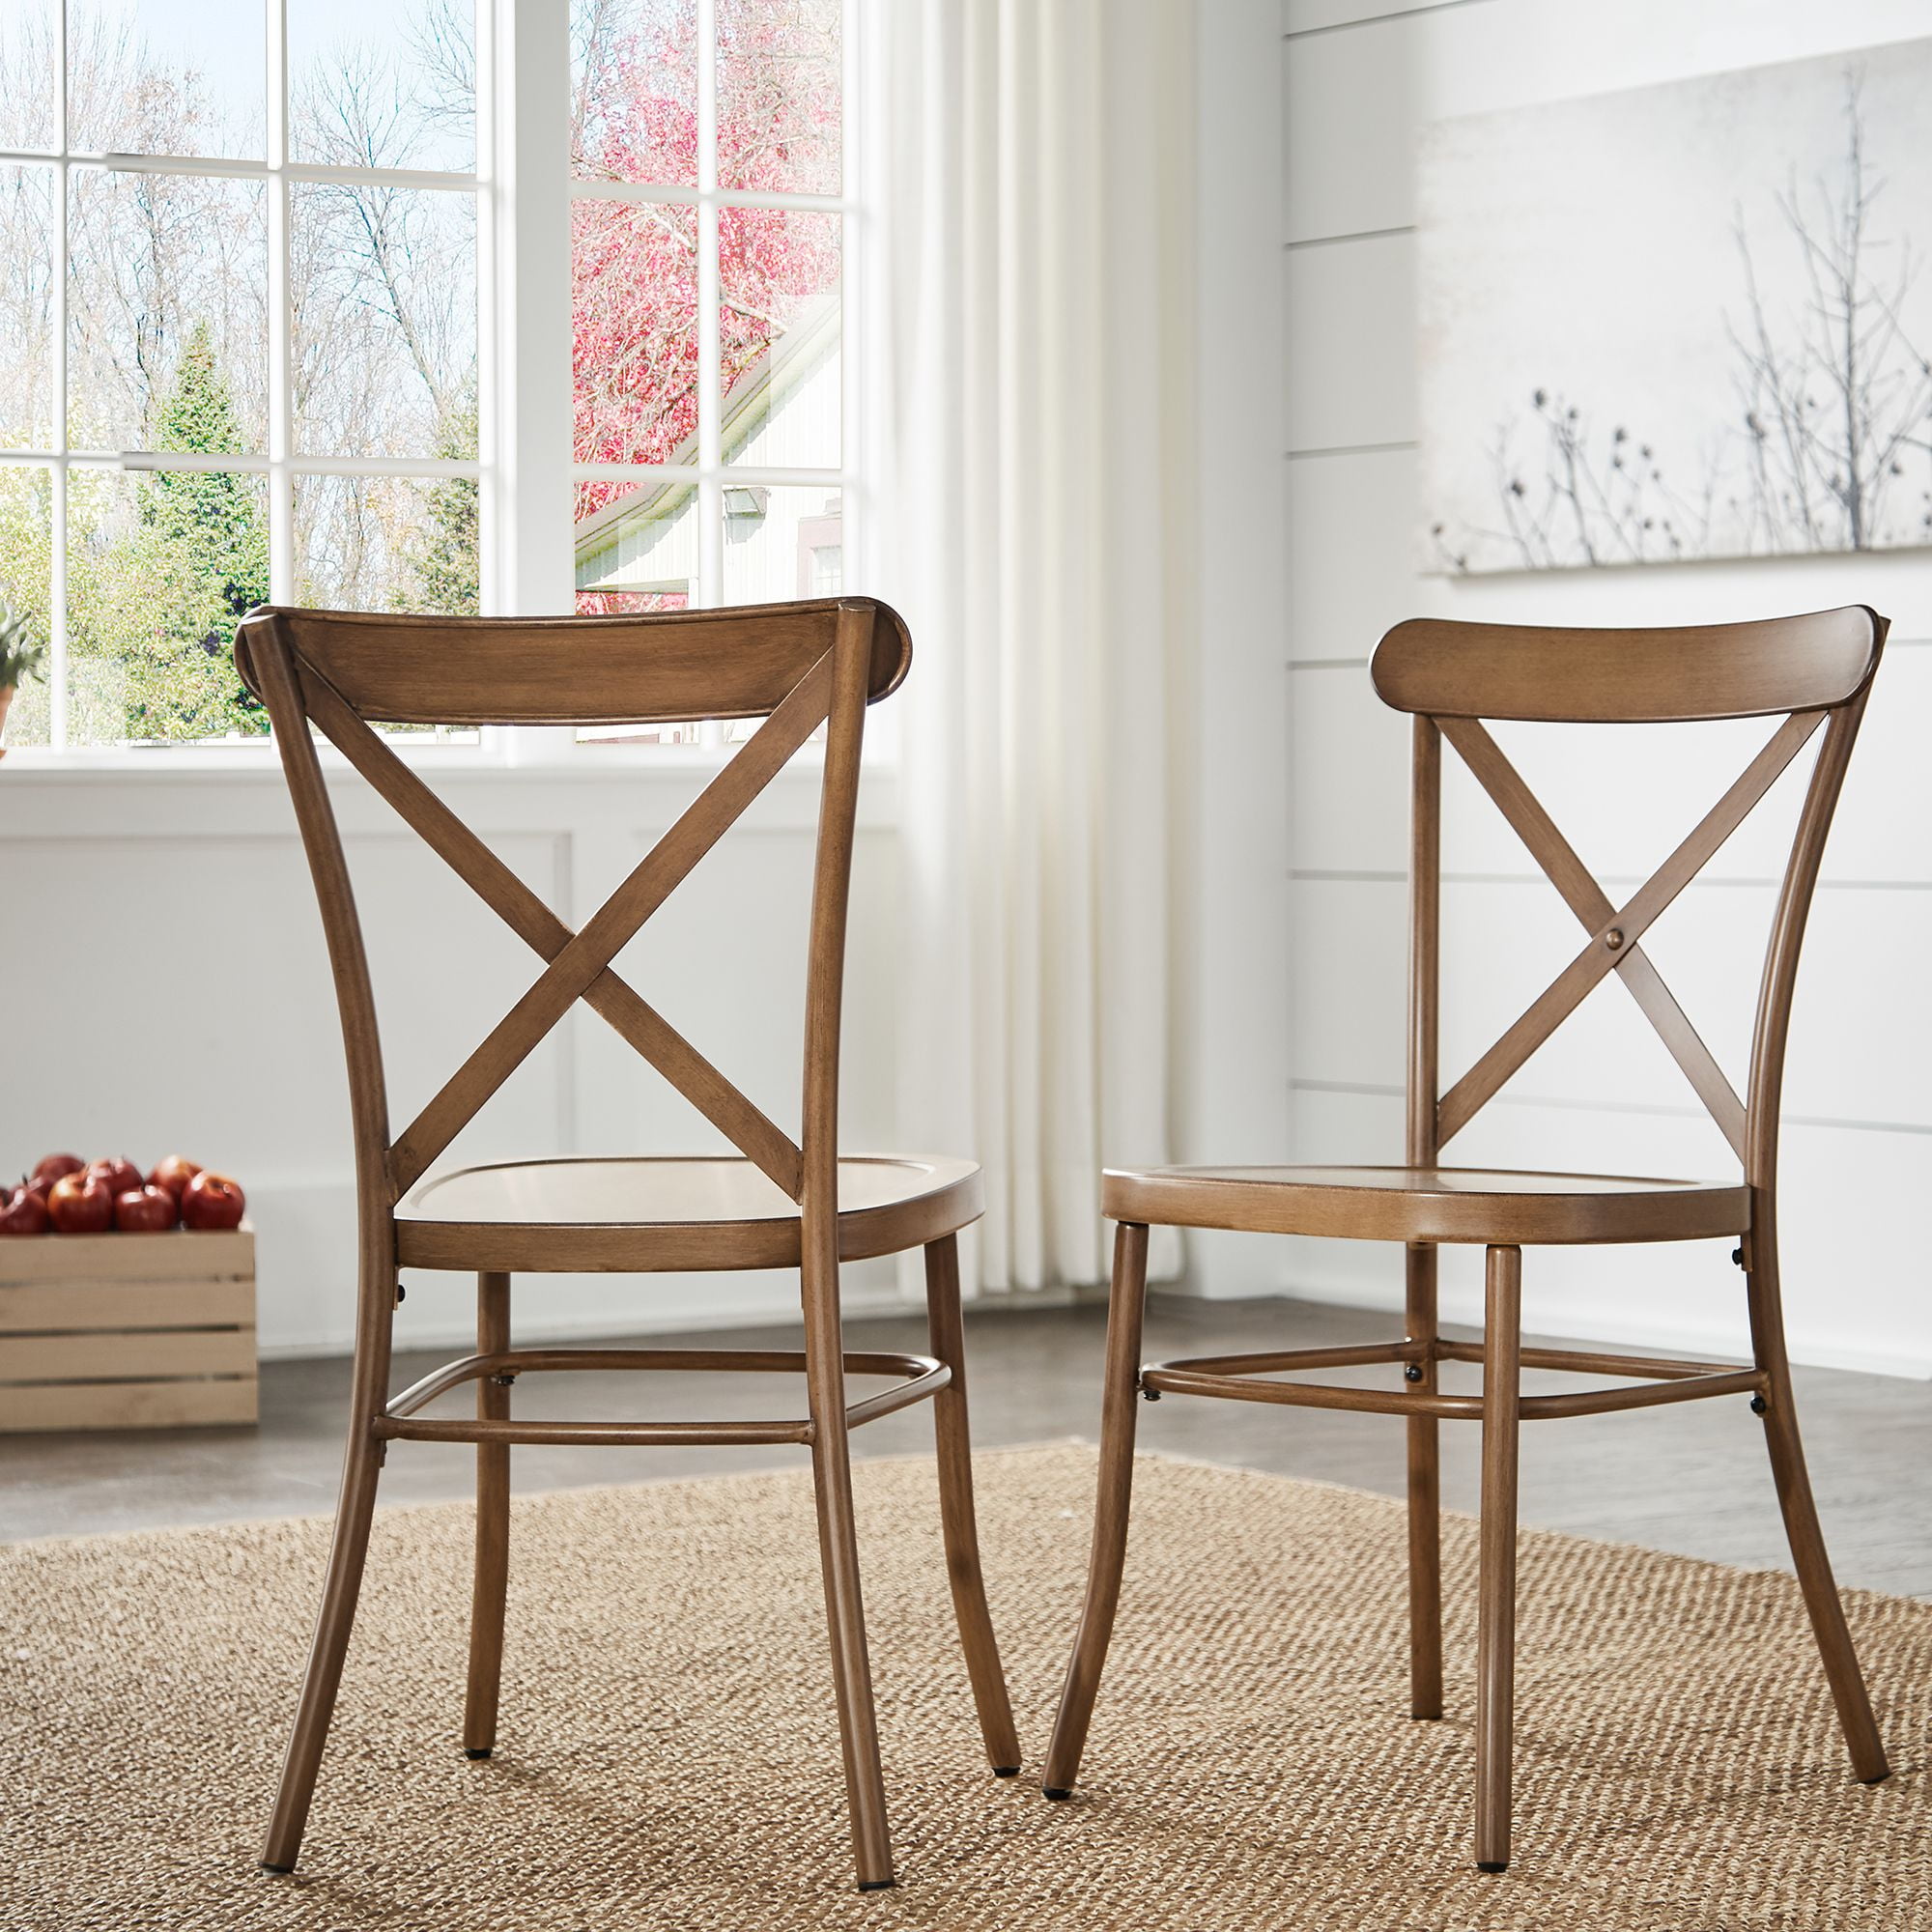 Weston Home Perry X Back Metal Dining, Cross Back Metal Dining Chair